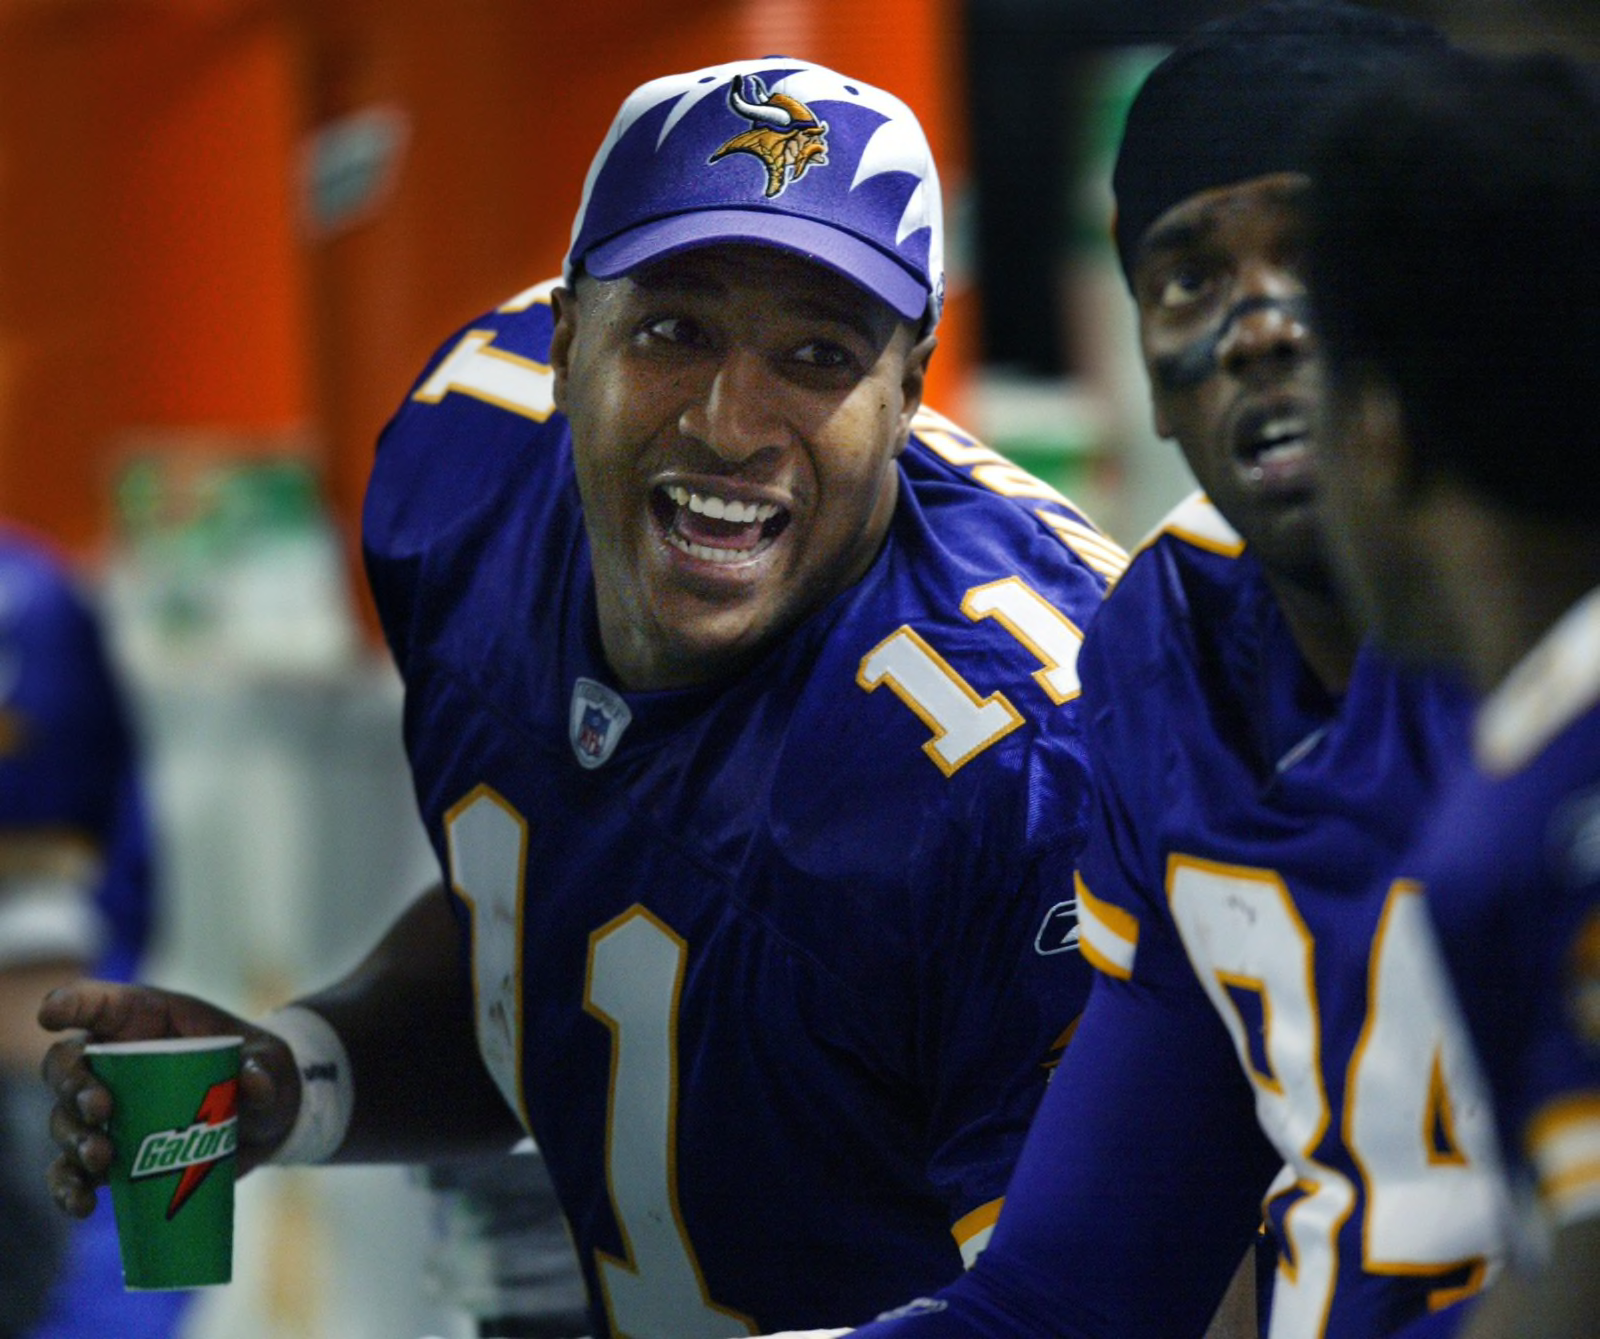 Viking quarterback Dante Culpepper , left, is all smiles on the bench during the third quarter as he talks to wide receiver Randy Moss and another teammate following Culpepper's second touchdown pass of the day to Moss. GENERAL INFORMATION: 12/7/03- Minneapolis, Mn - Seattle Seahawks vs. MN Vikings at the Metrodome. (Photo by JUDY GRIESEDIECK/Star Tribune via Getty Images)